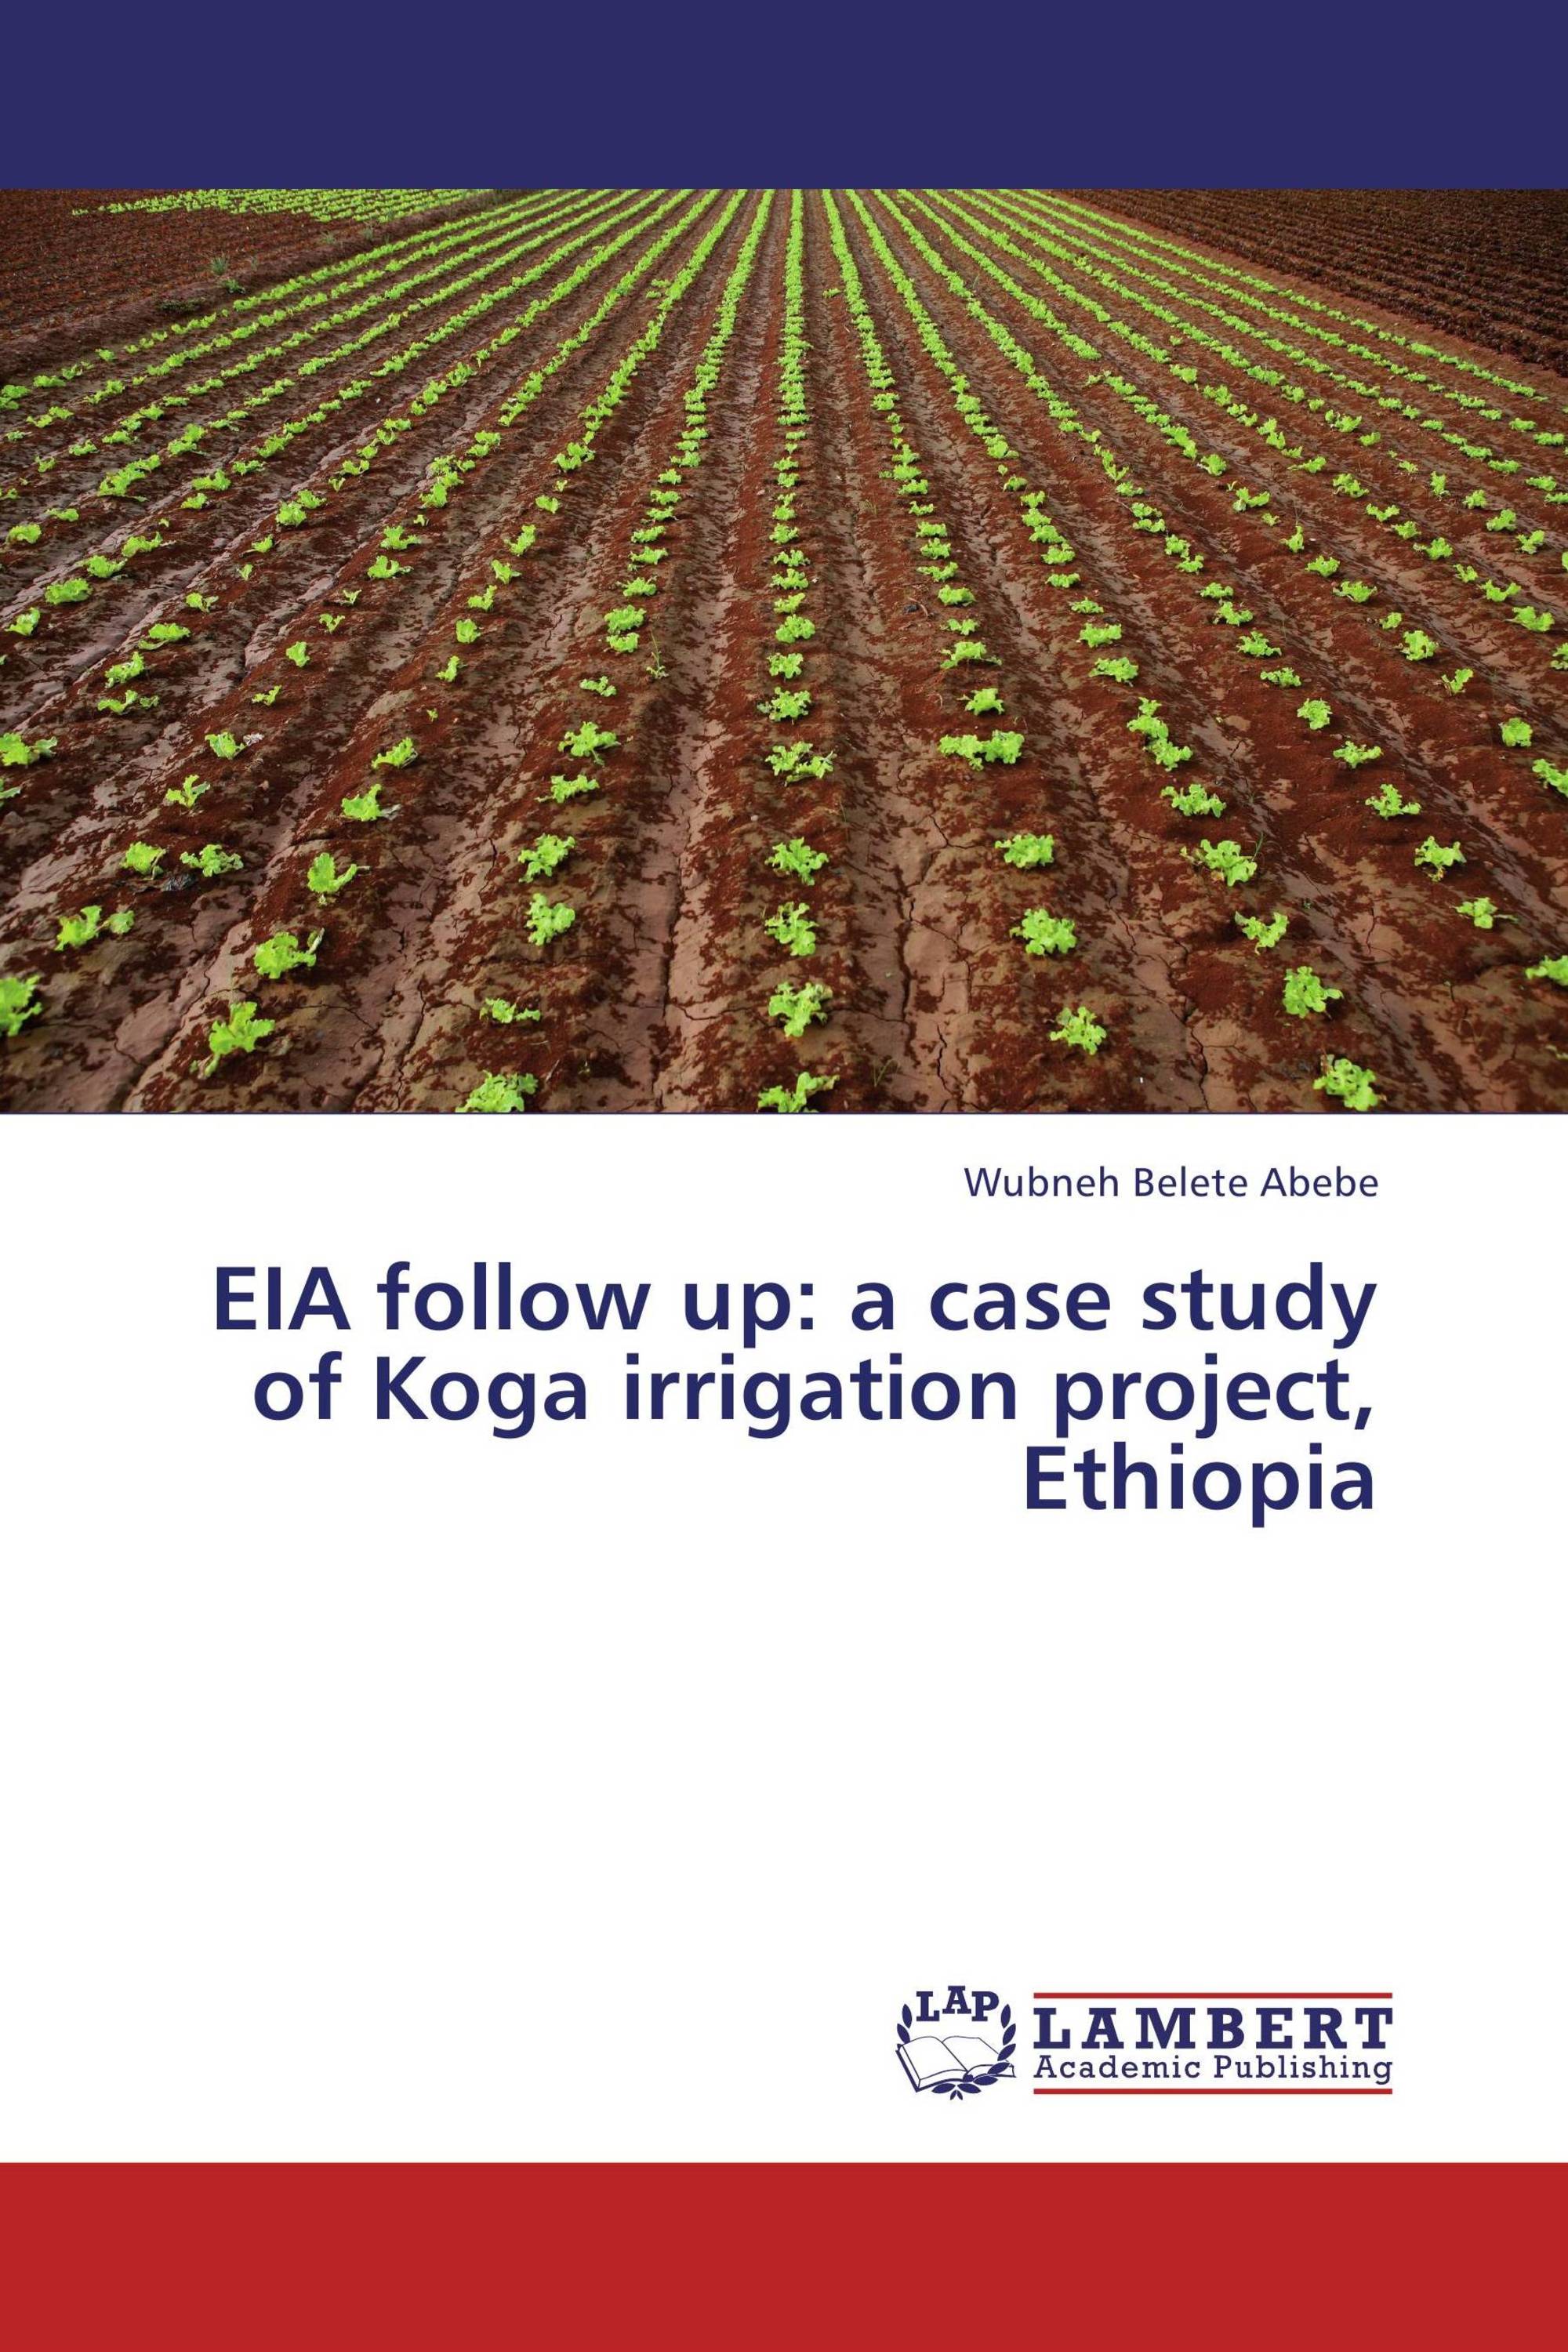 case study on irrigation project